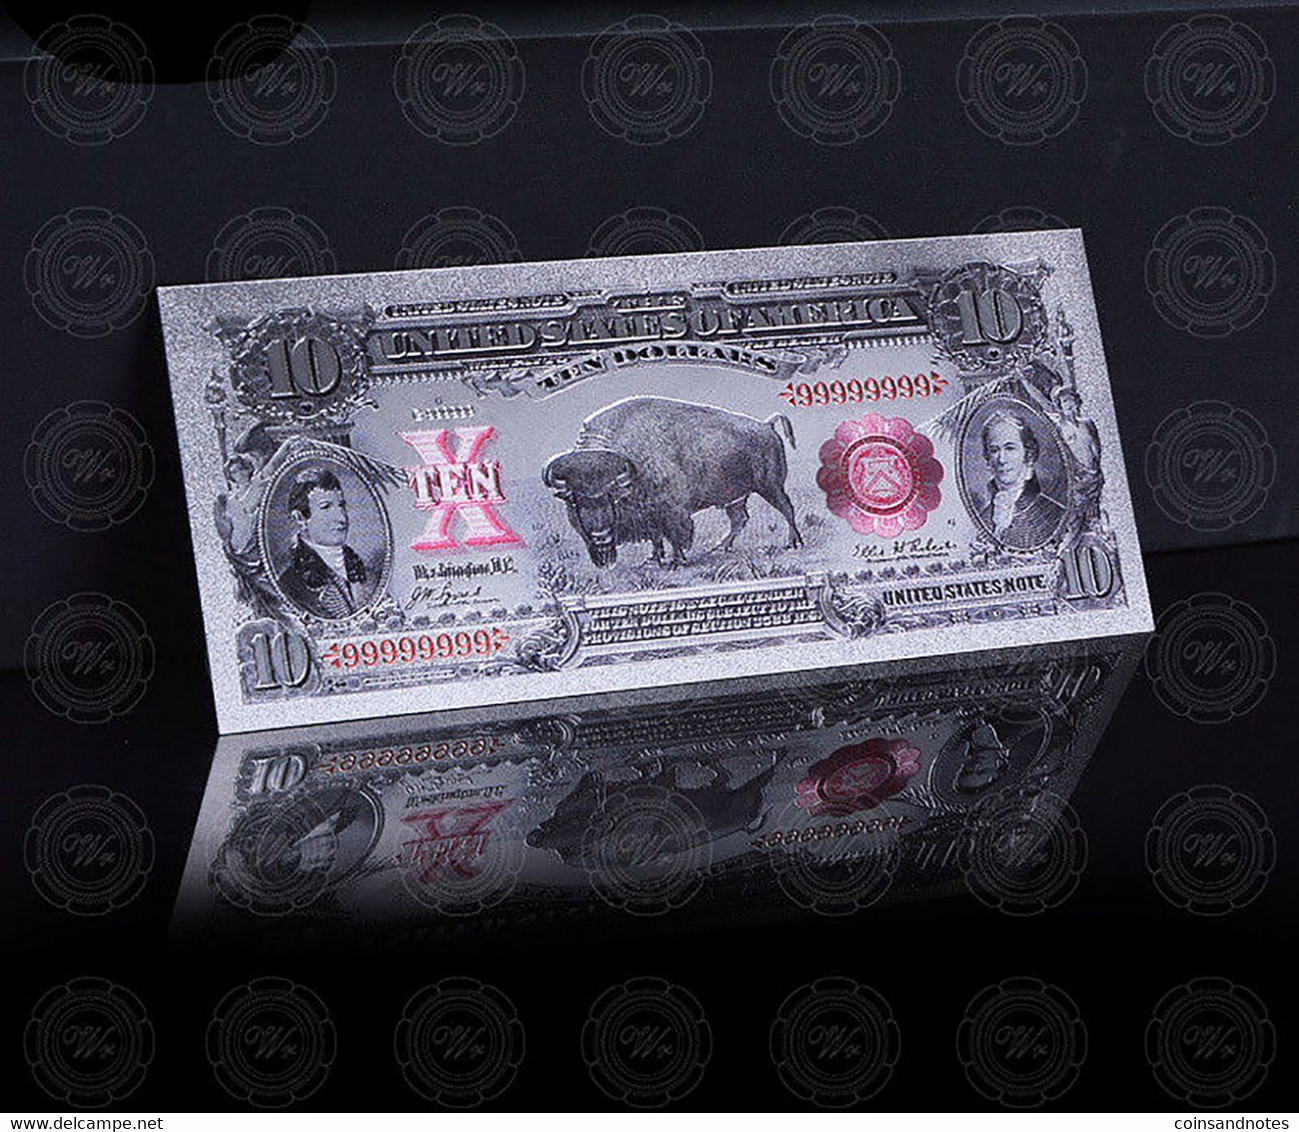 USA - Polymer 10$ 'Bison' Banknote - Completely Silver Laminated - UNC & CRISP - Collections